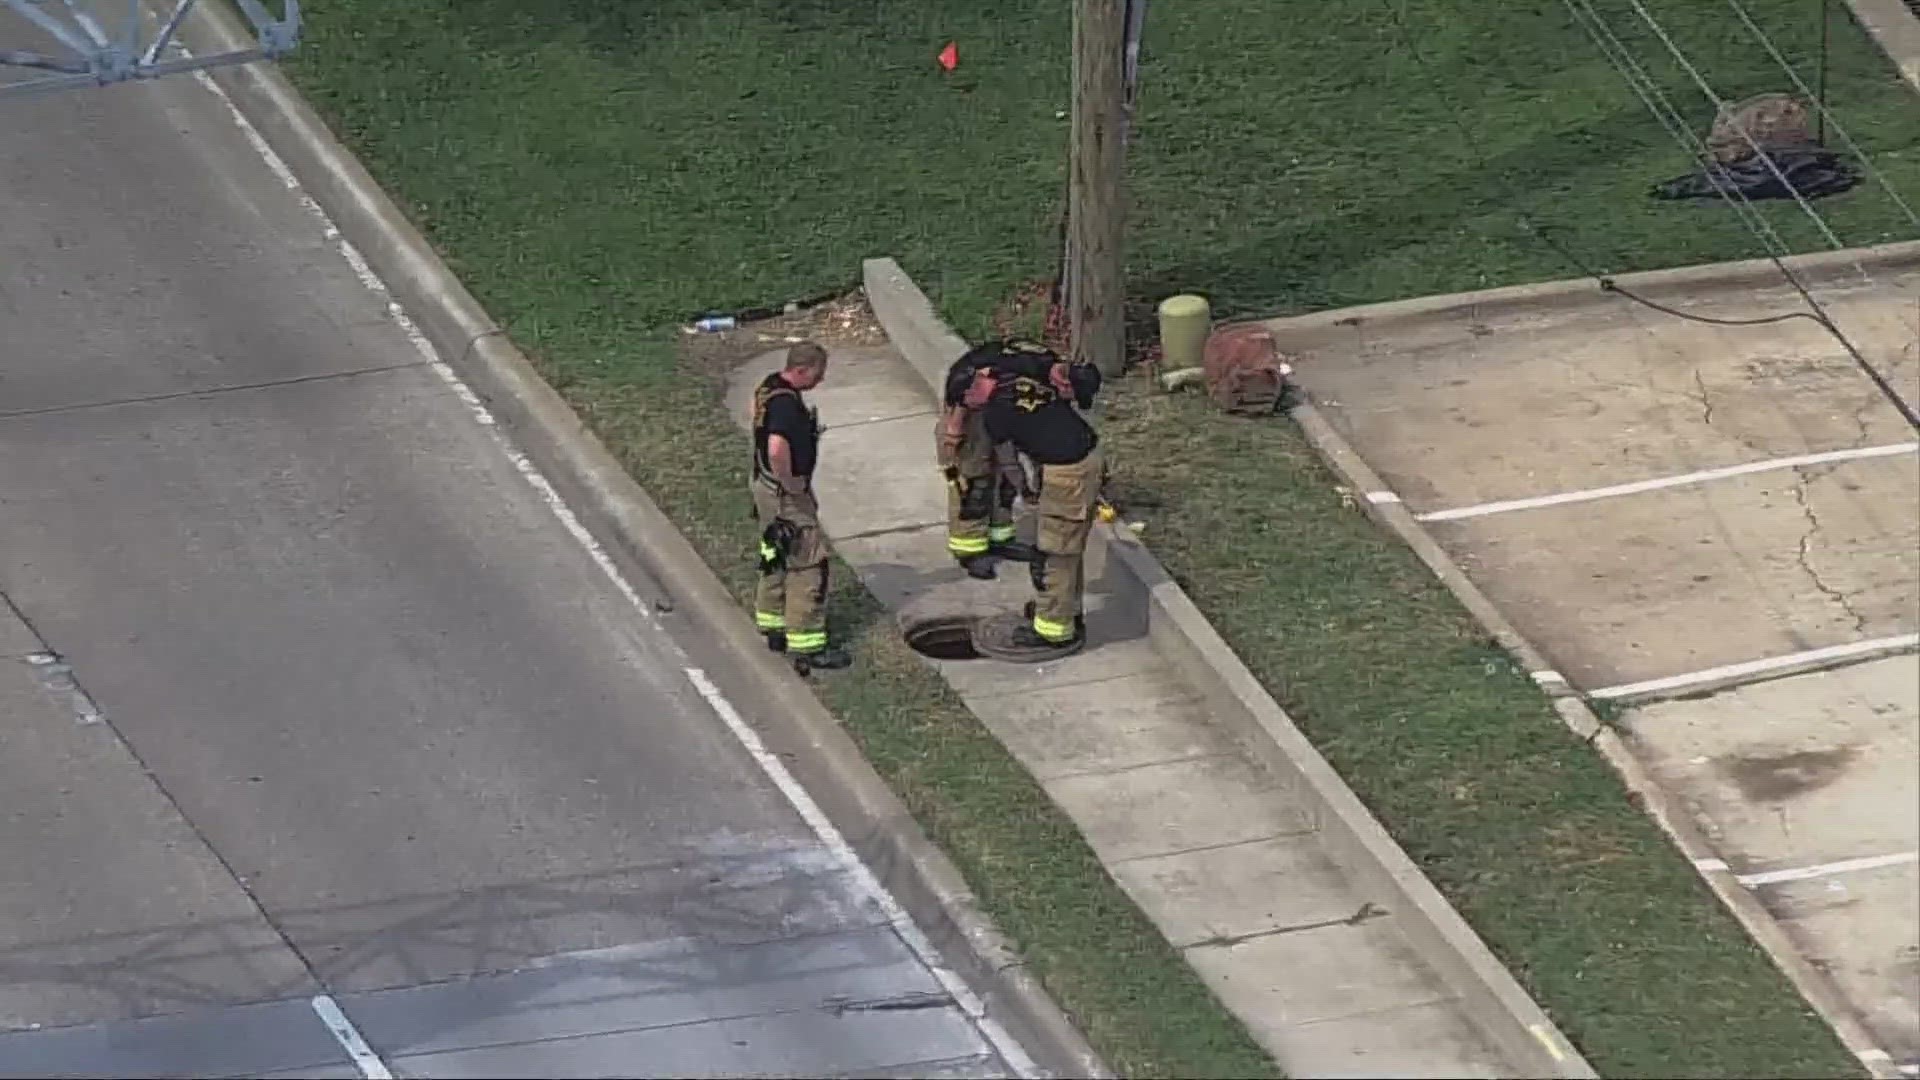 According to officials, crews began responding around 1:30 p.m. Friday after a call from a nearby Zenna restaurant about a strong smell of gasoline.